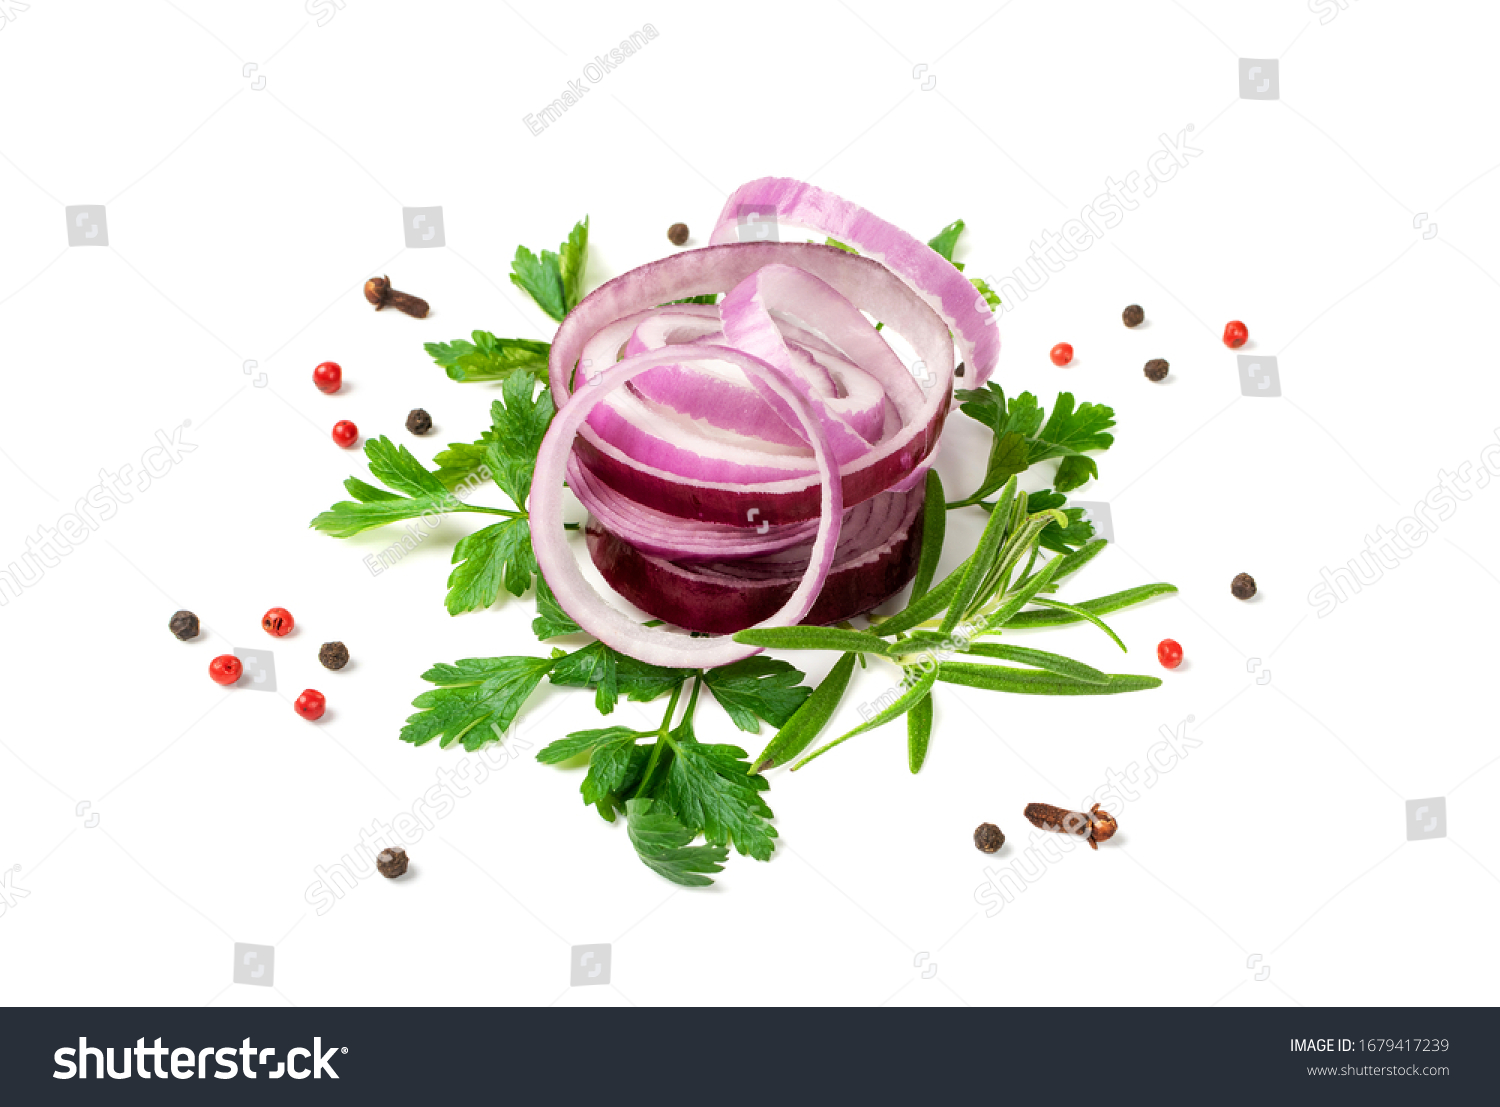 Fresh sliced red onion cuts isolated. Raw purple onion rings or shallot slices with greens and spices on white background #1679417239